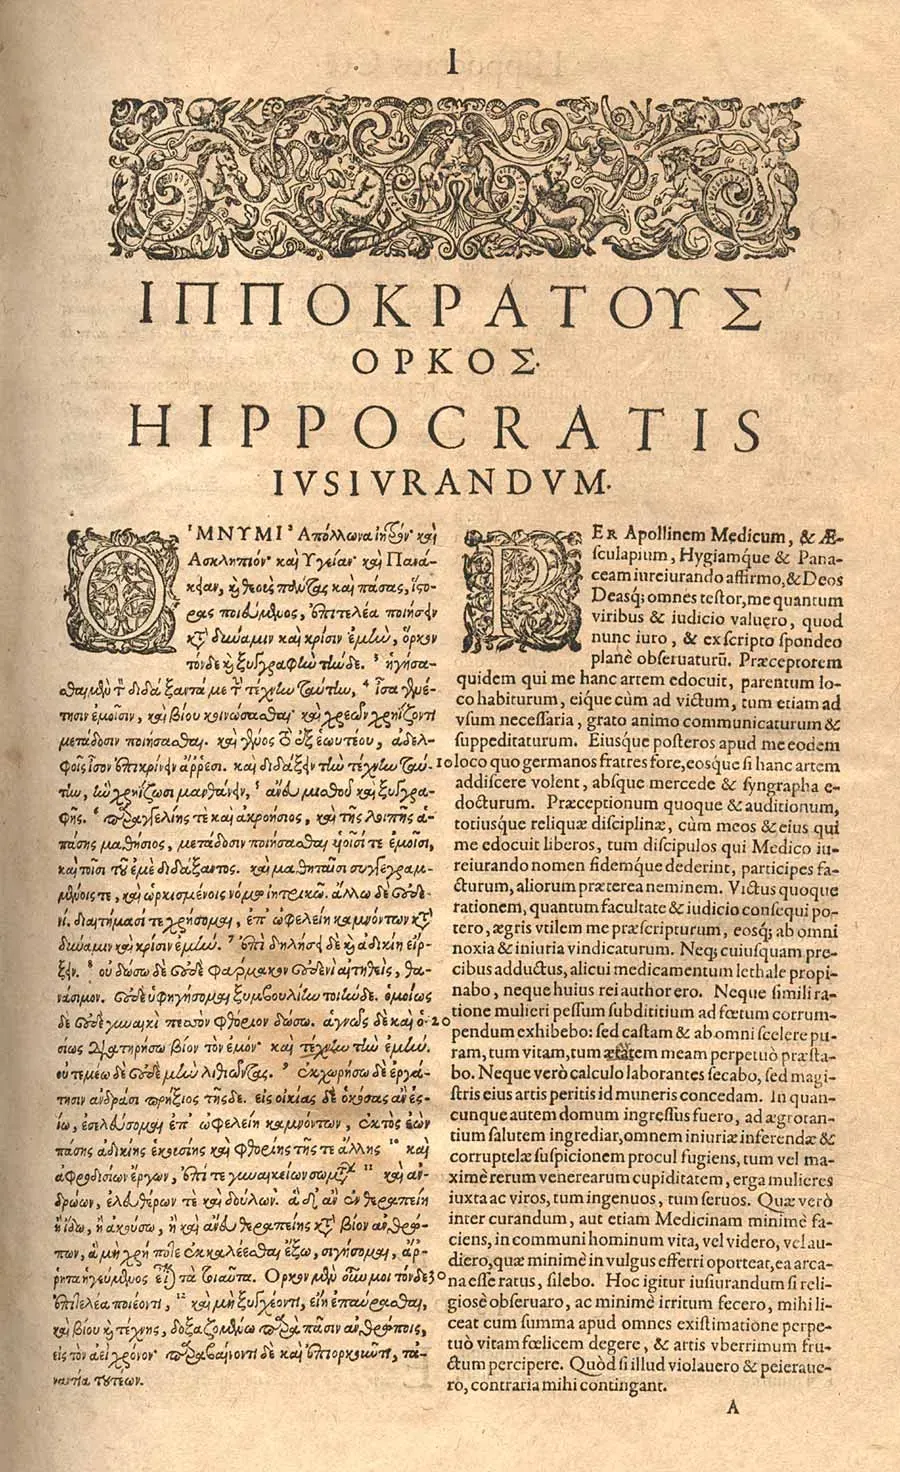 Image of the Hippocratic Oath, in Greek, and Latin